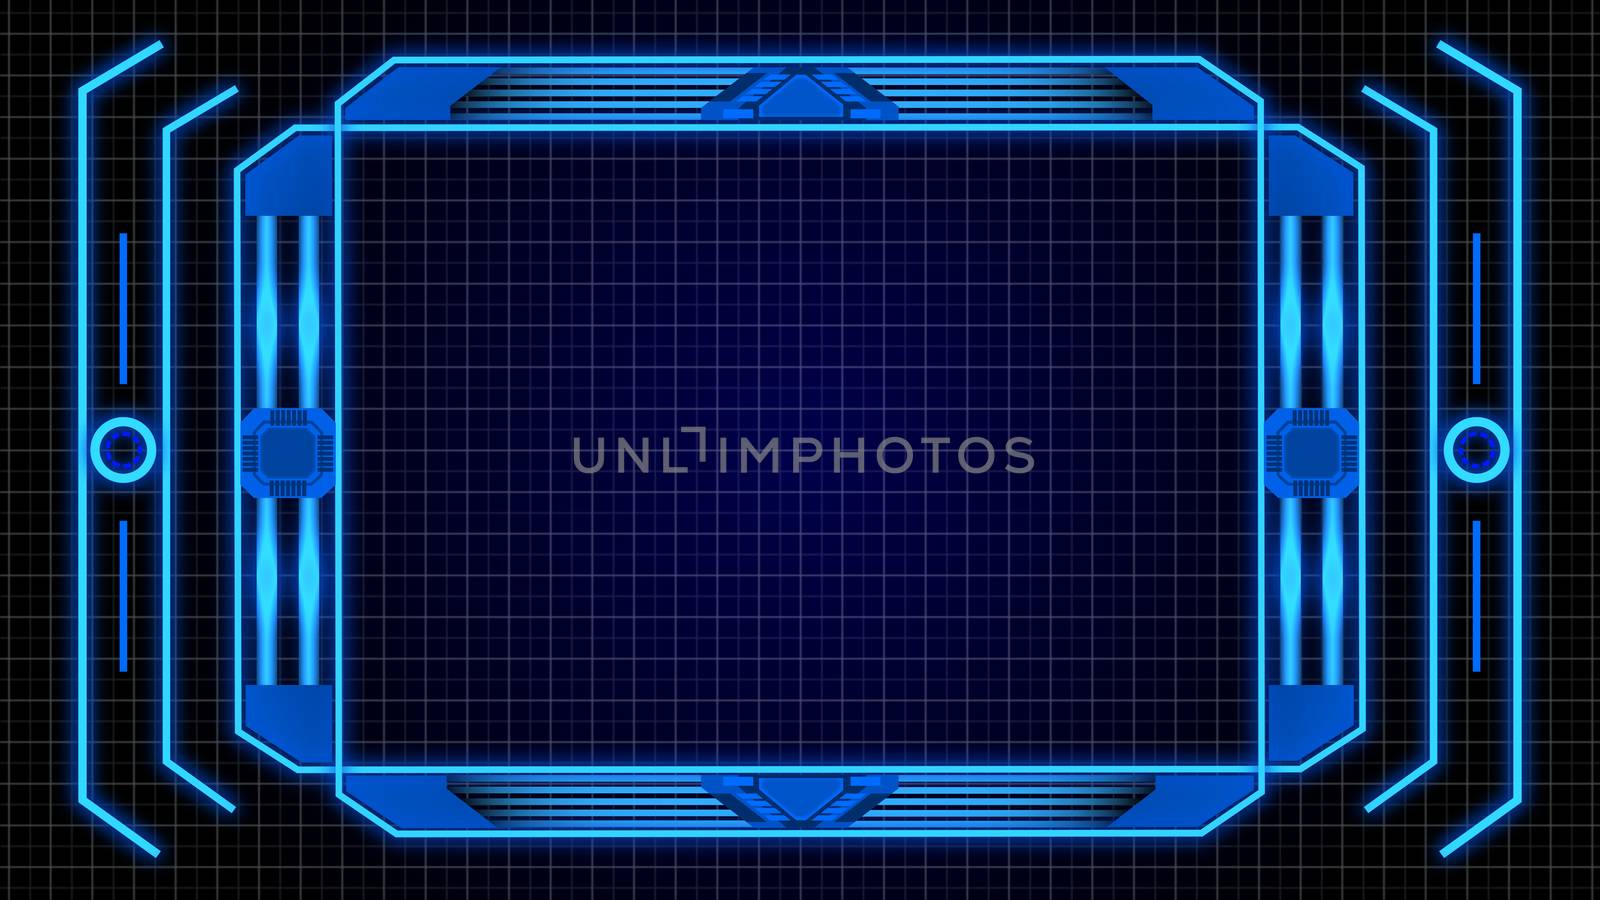 Monitor Screen Border With Blue Digital Elements Details and Grid Abstract Background